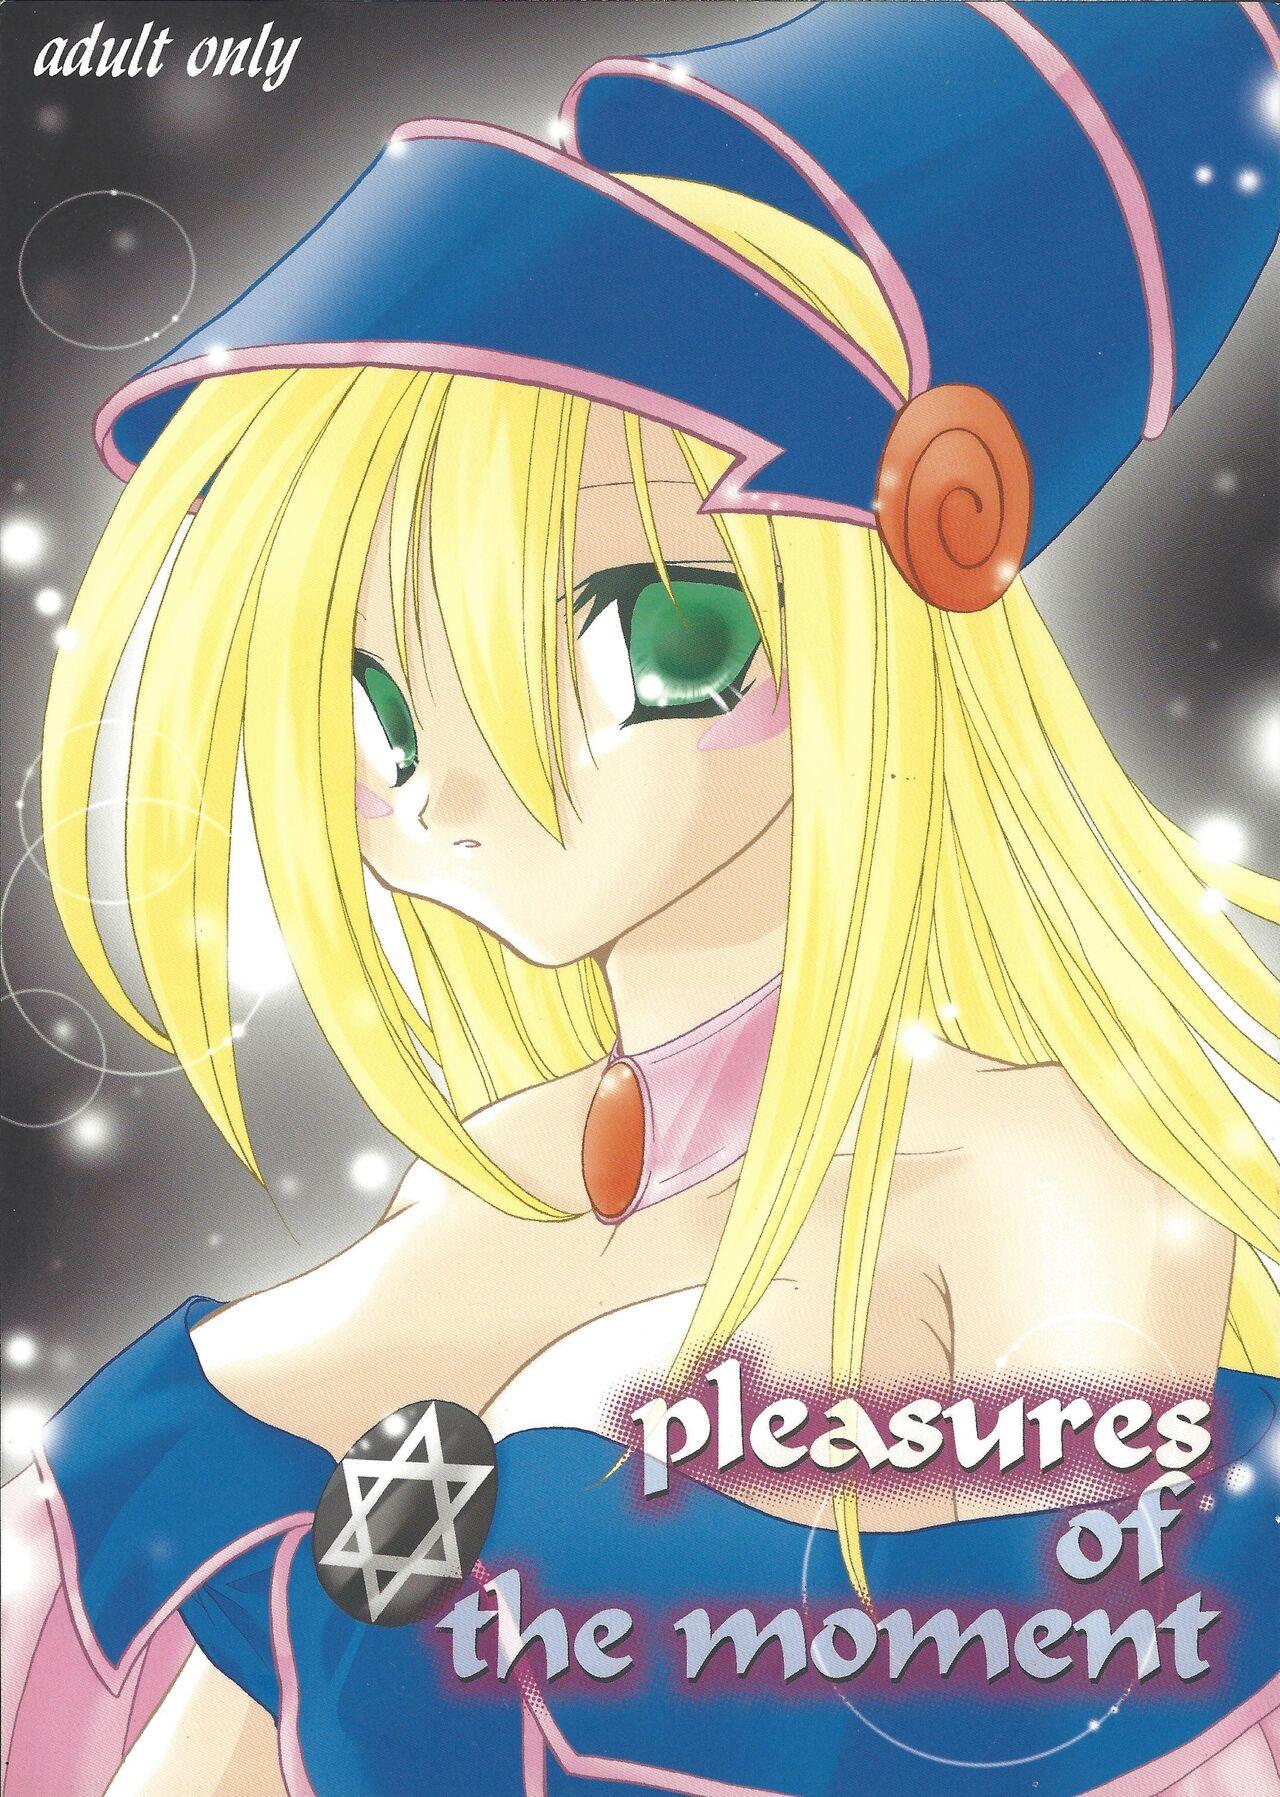 Gemidos pleasures of the moment - Yu gi oh Uncensored - Picture 1